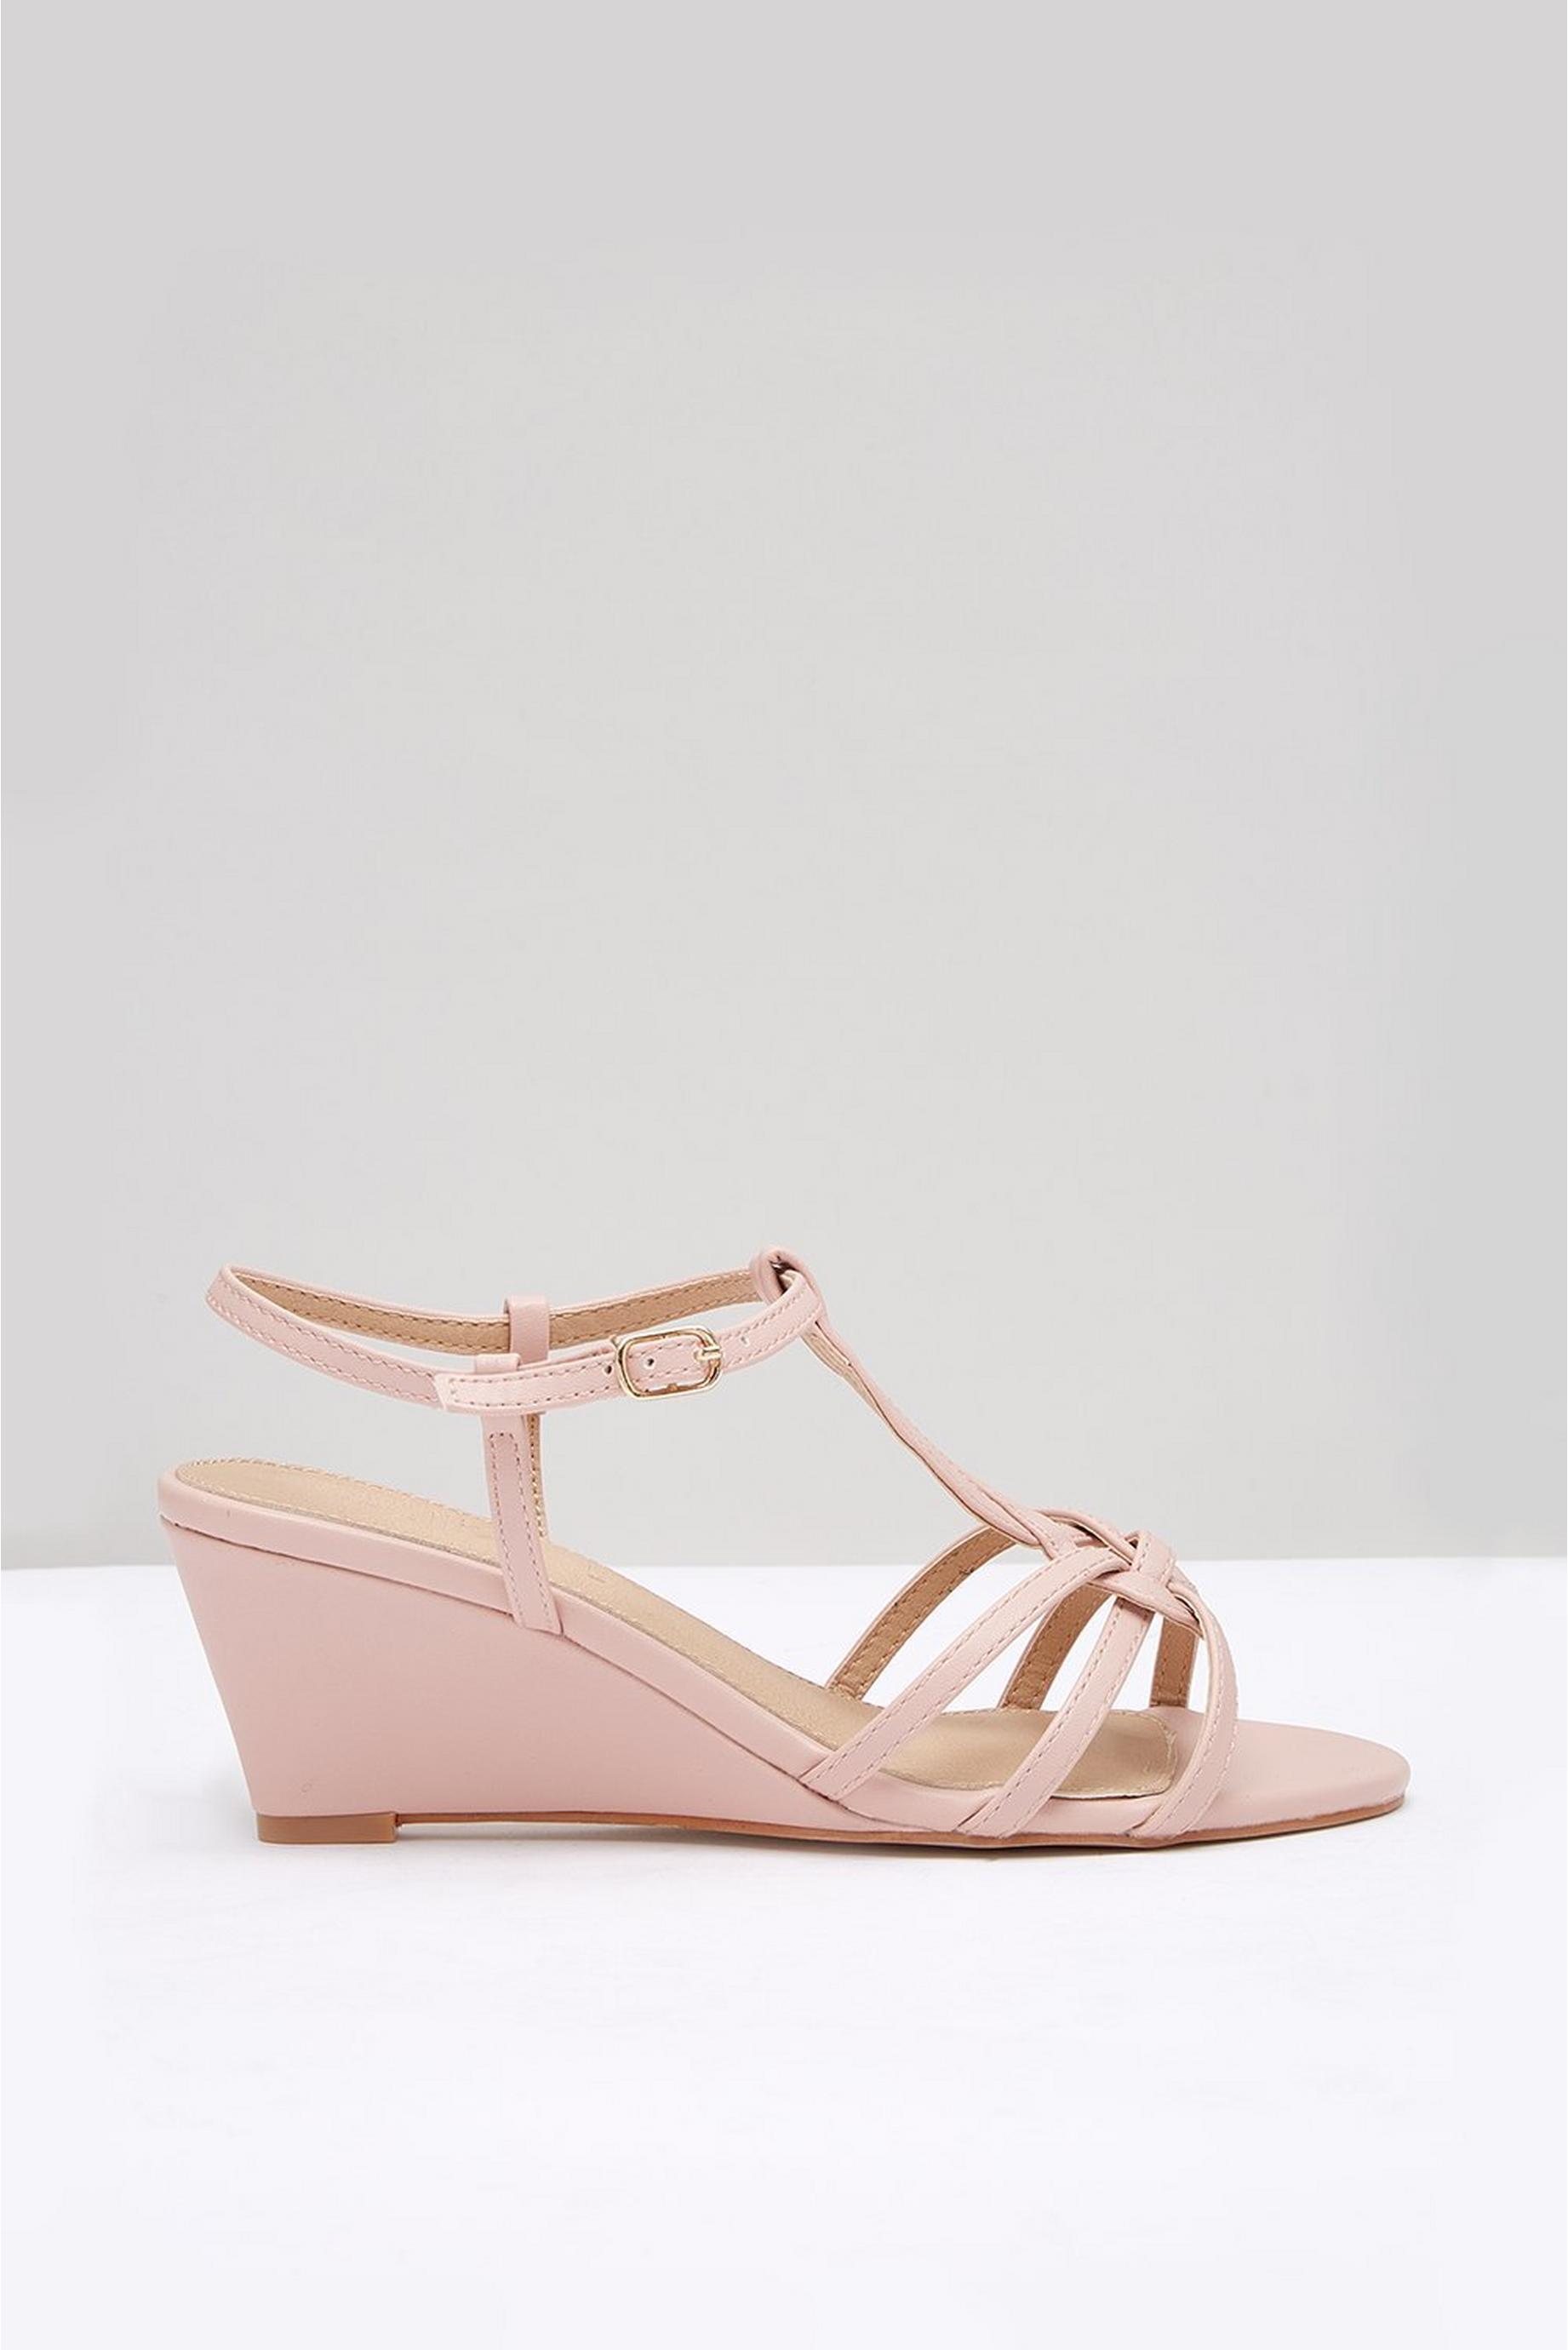 Ryder Strappy Low Wedge Sandal